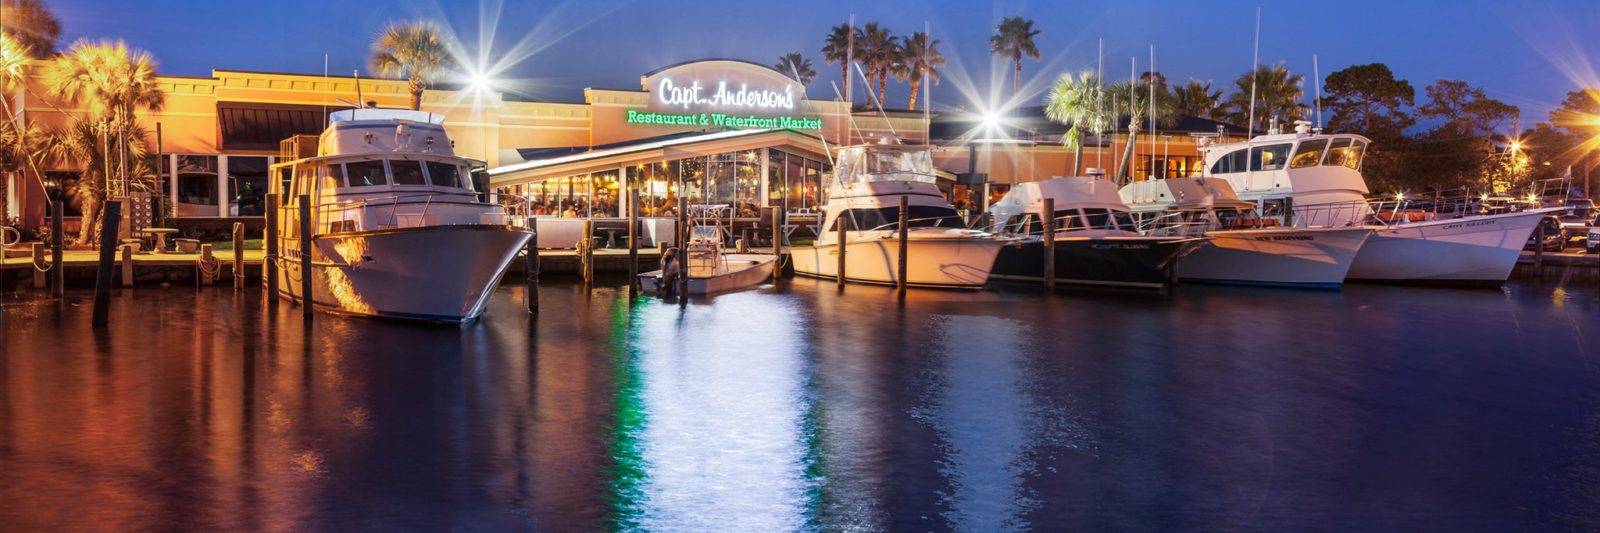 Capt. Anderson's Restaurant illuminated at night, showcasing docked boats and vibrant waterfront dining, part of Panama City's most scenic waterfront restaurants.